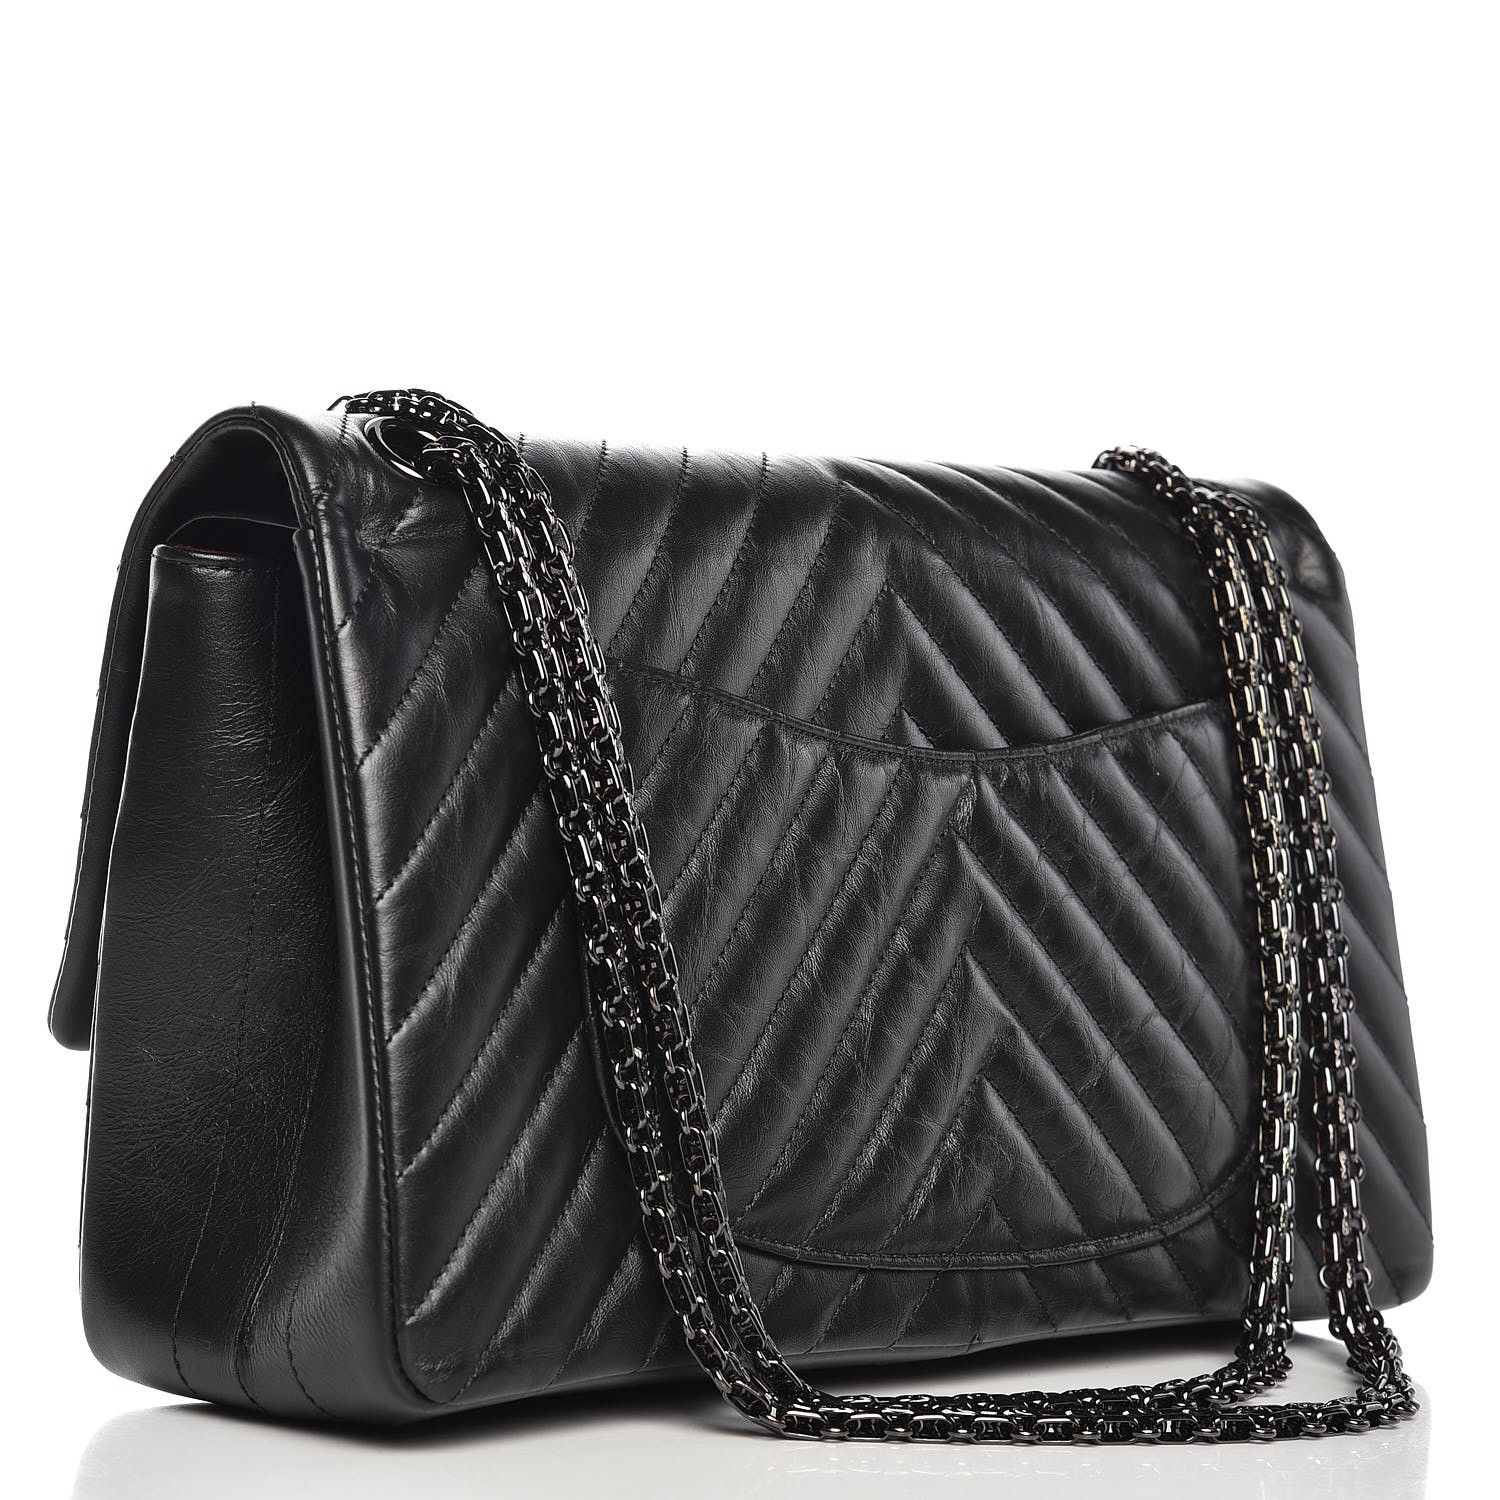 CHANEL Aged Calfskin Chevron Quilted 2.55 Reissue 226 Flap So Black ...